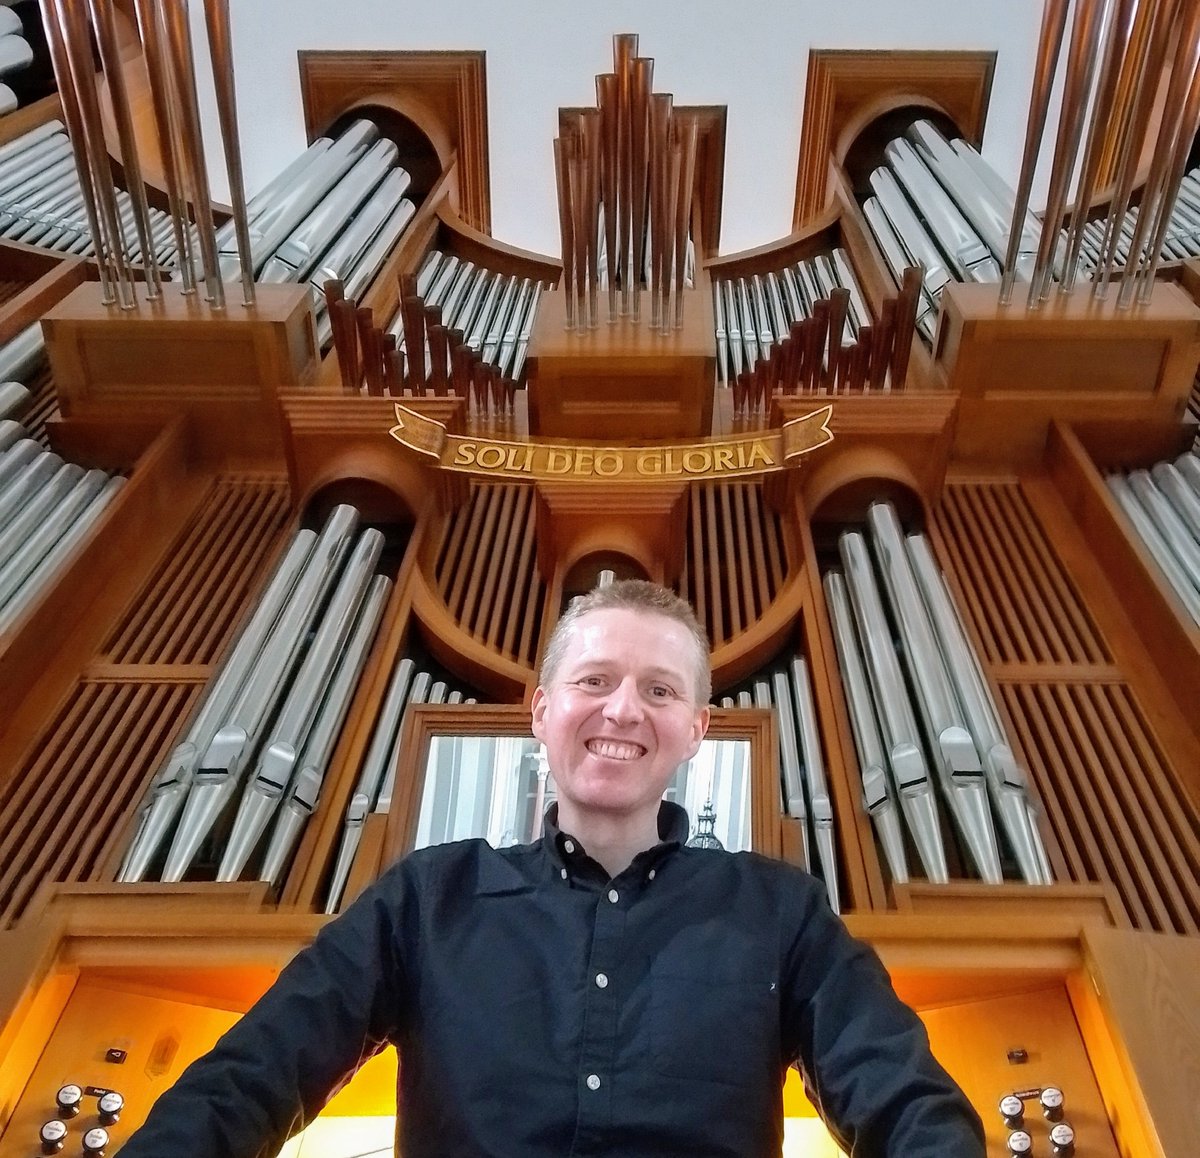 Jonathan looking very happy in front of the newly rebuilt Zych Pipe Organ of All Saints Church, Warsaw! All sounding wonderful ahead of the reopening concert tonight (Tuesday 16th April 2024 7.30pm)! Look forward to seeing everyone there!